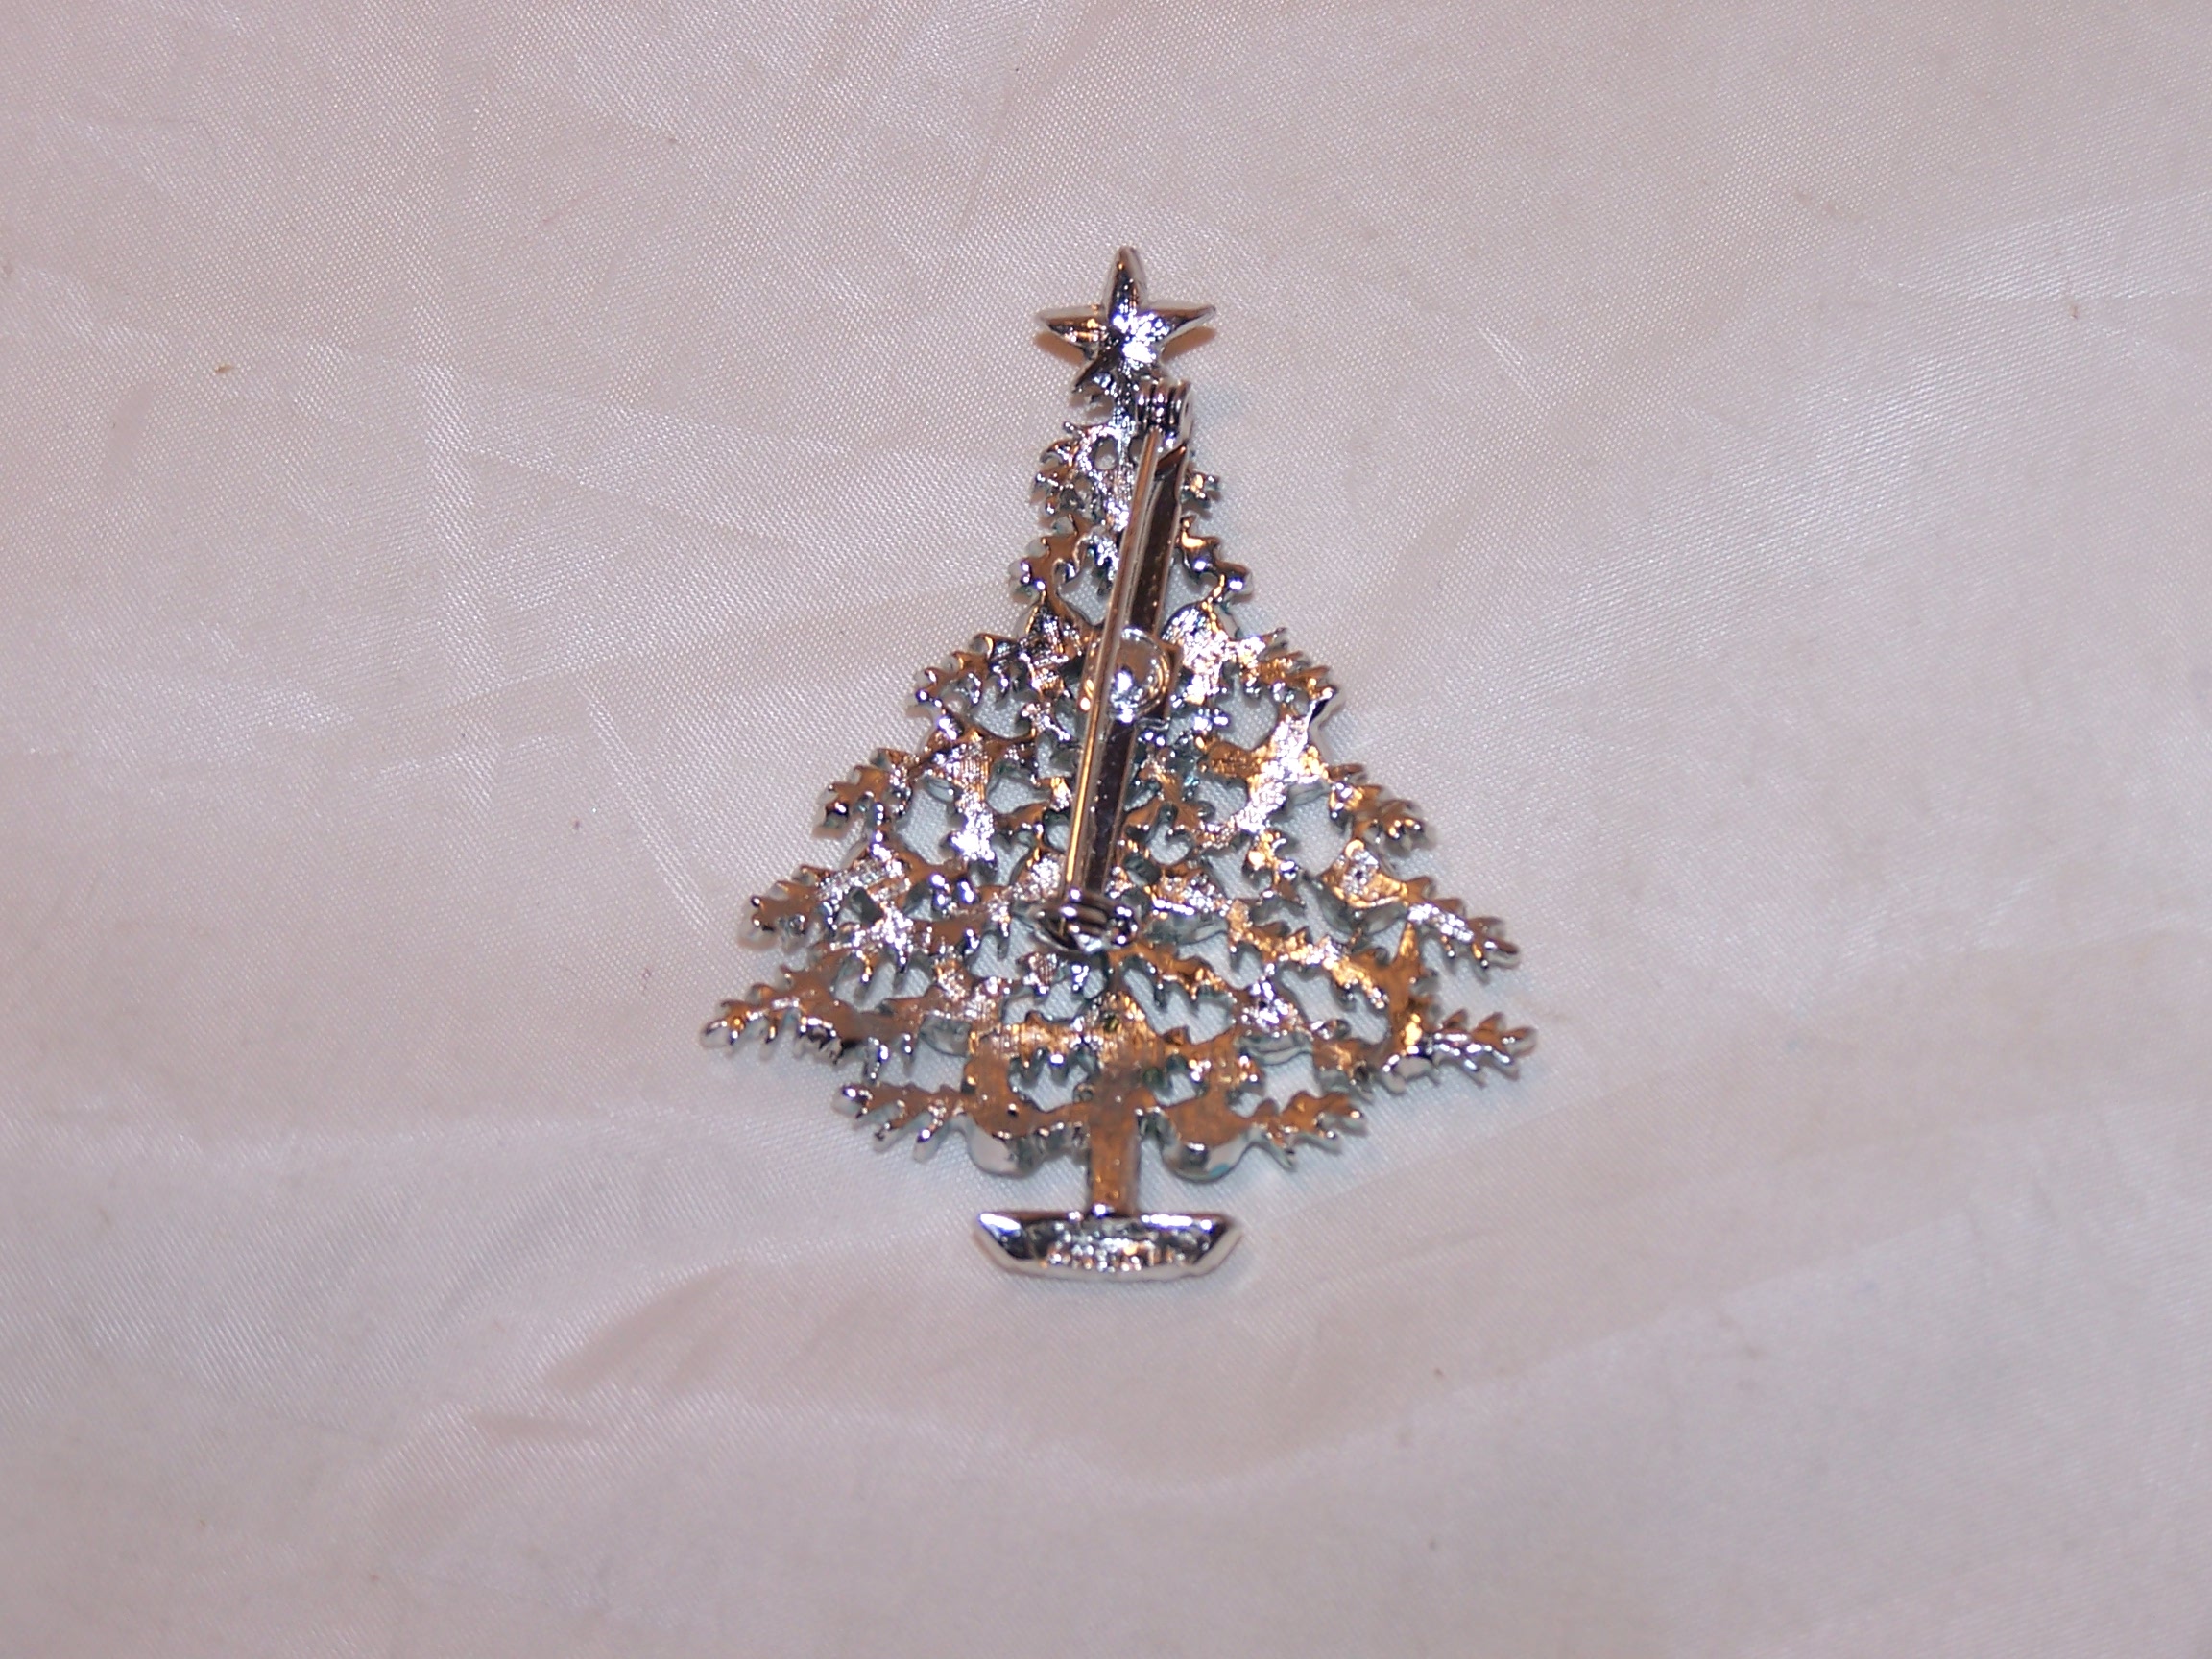 Image 2 of Christmas Tree, Blue and Silver, Pin Brooch